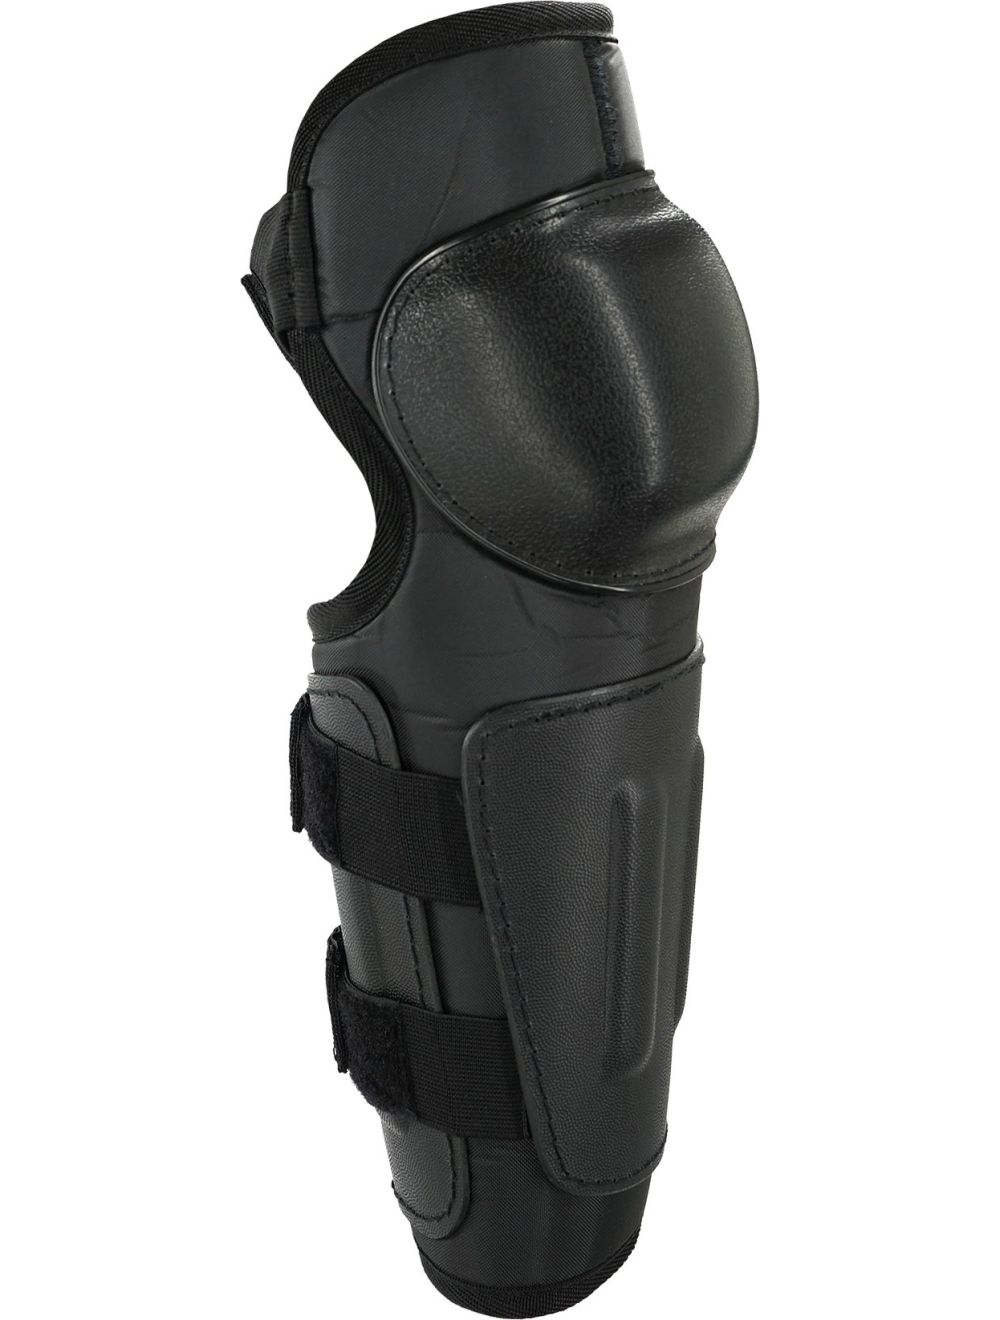 Imperial Hard Shell Forearm/Elbow Protector